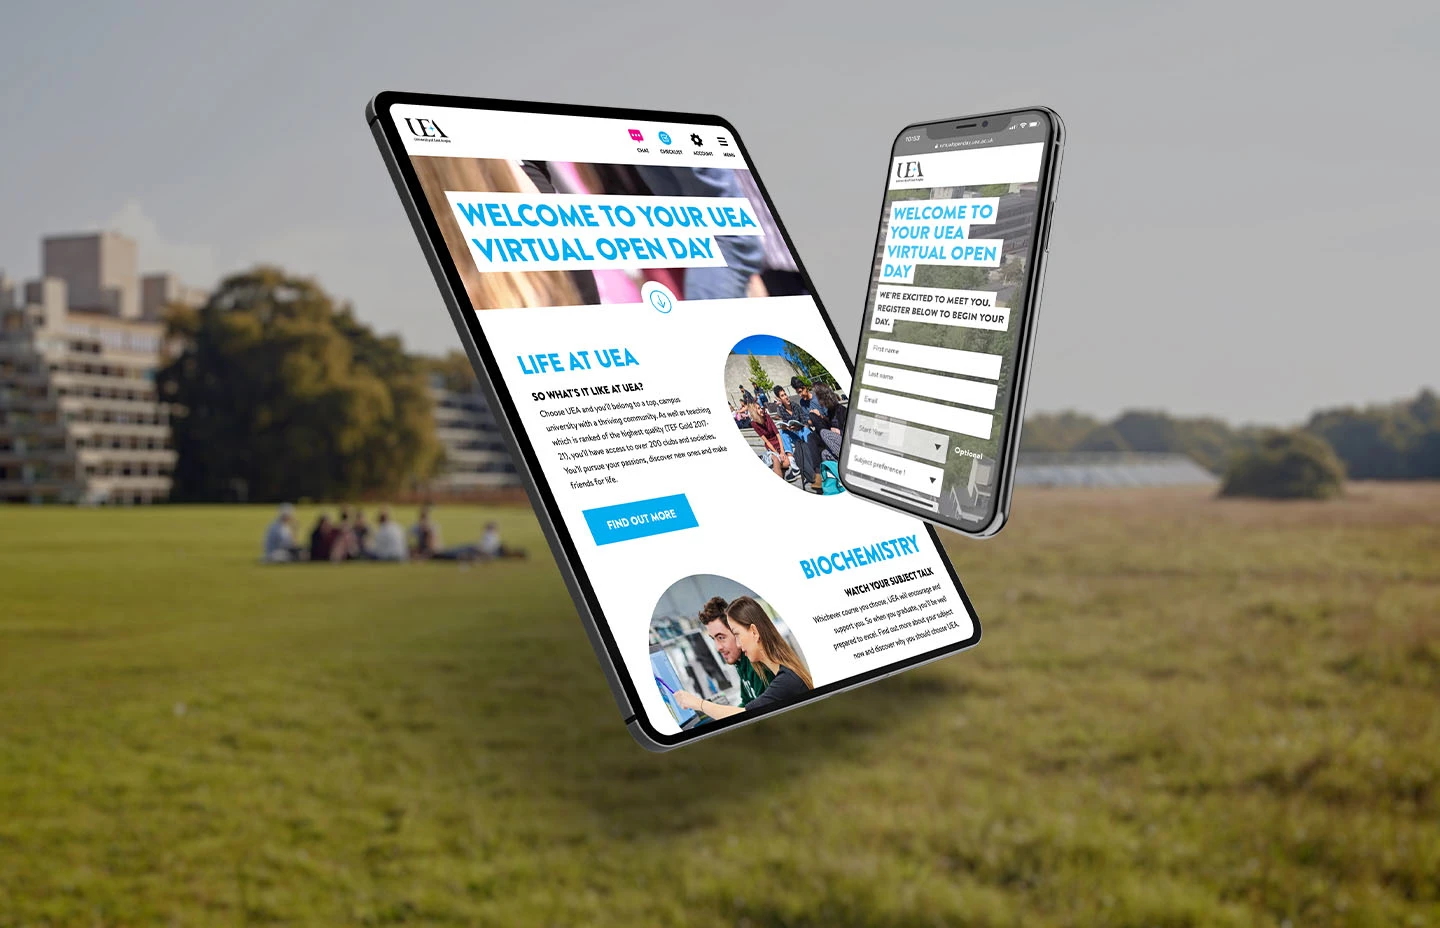 UEA Virtual Open Day welcome screen displayed on a tablet and mobile device